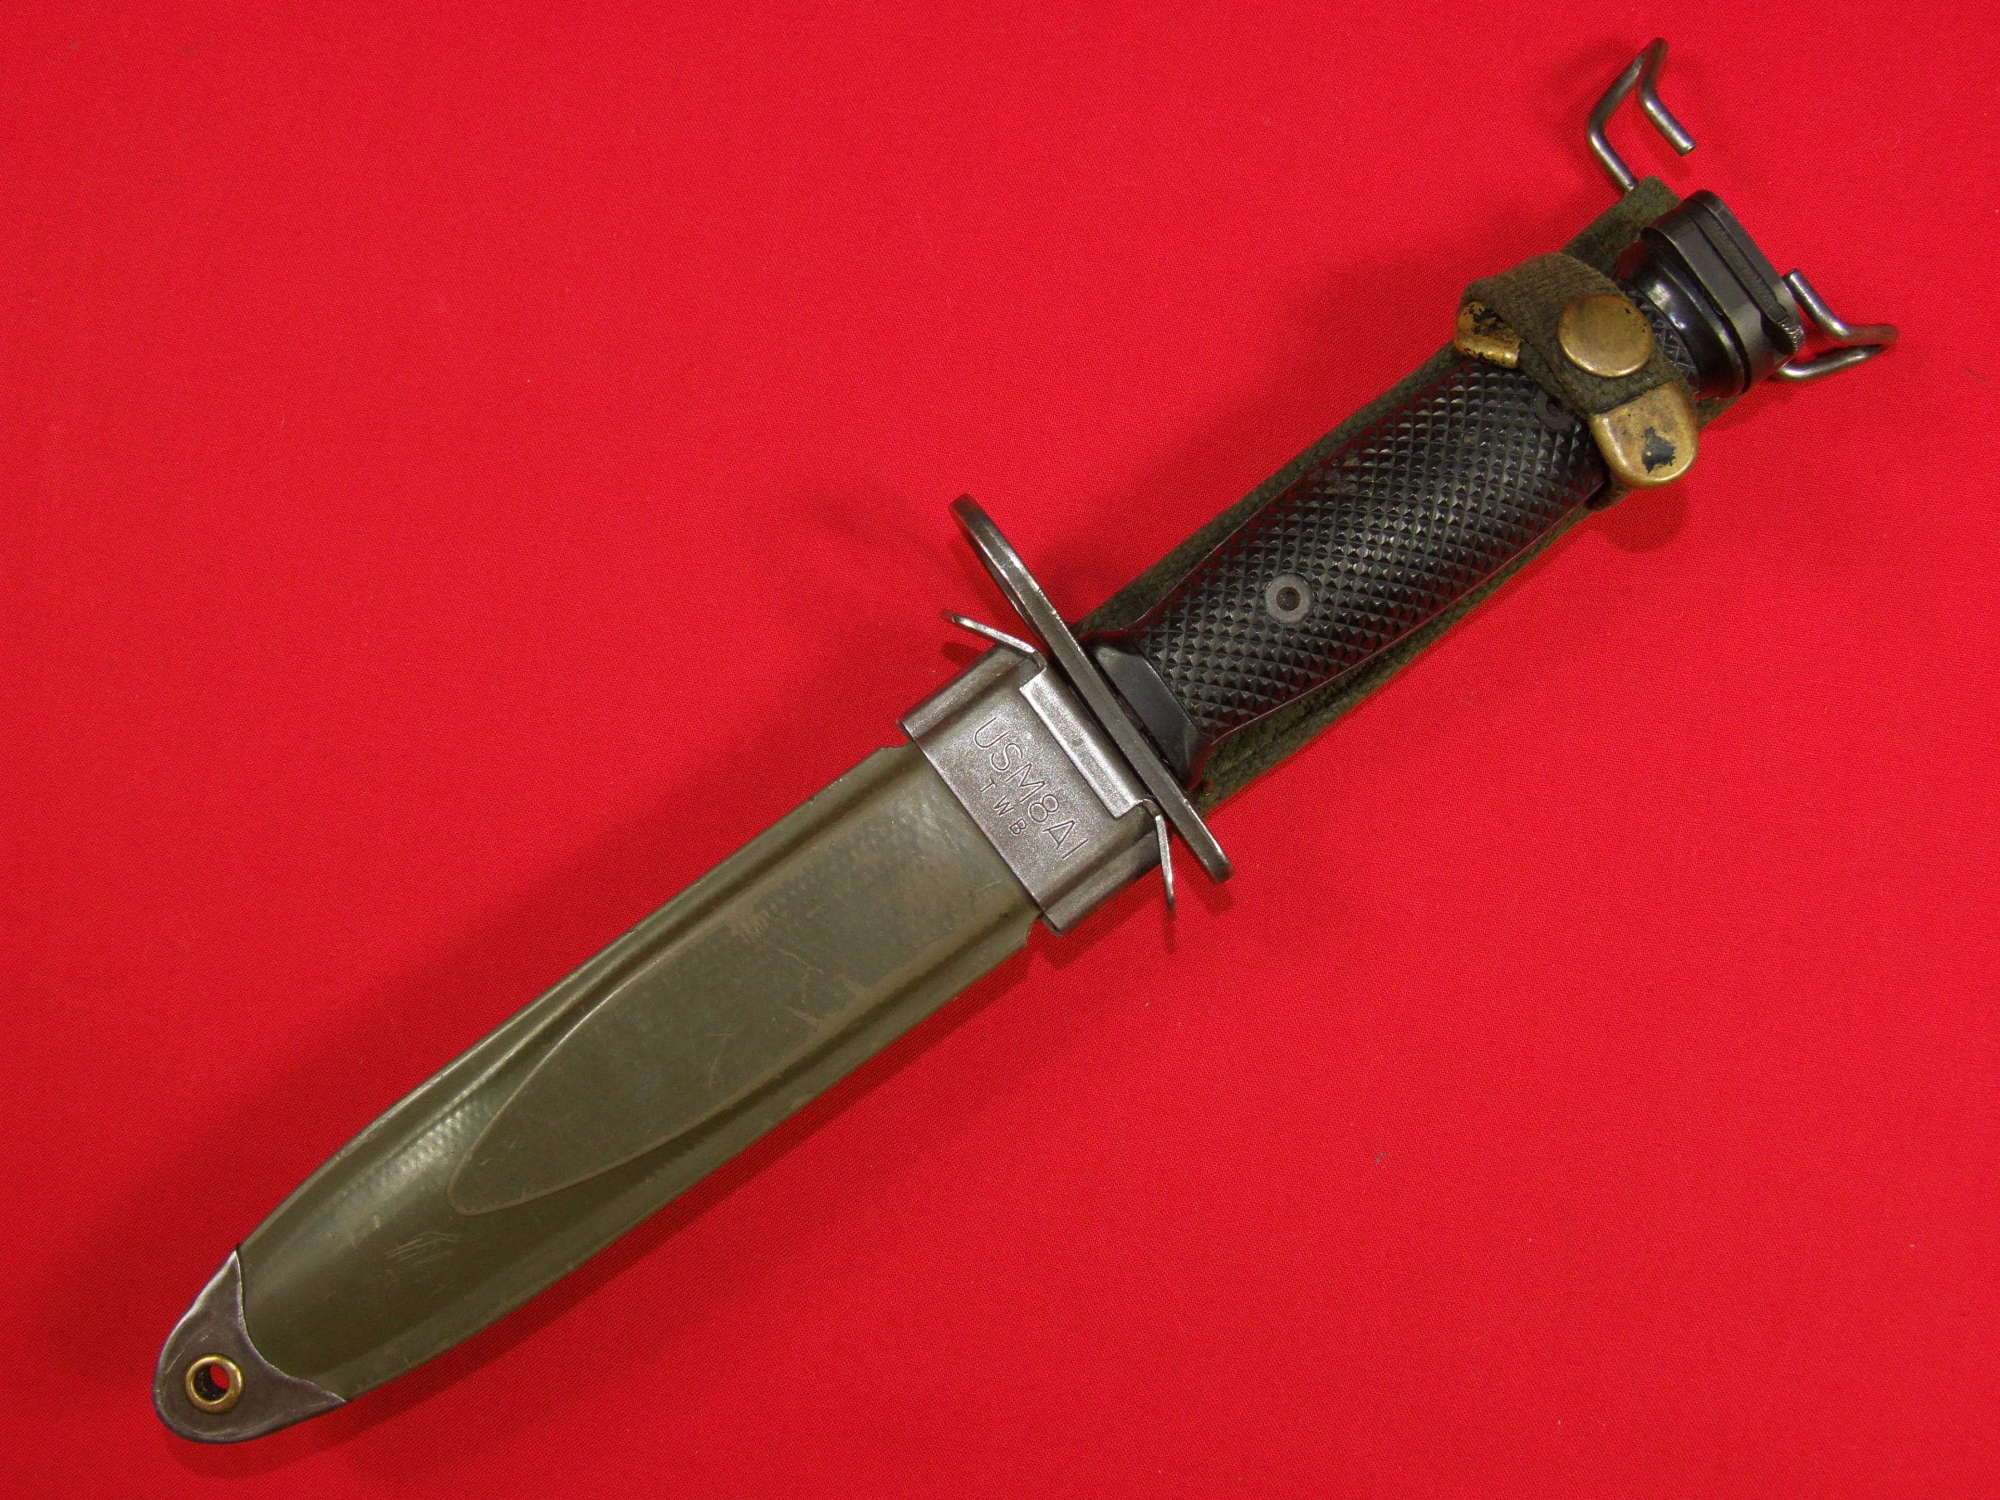 US M7 Bayonet for the M16 Rifle. C1973